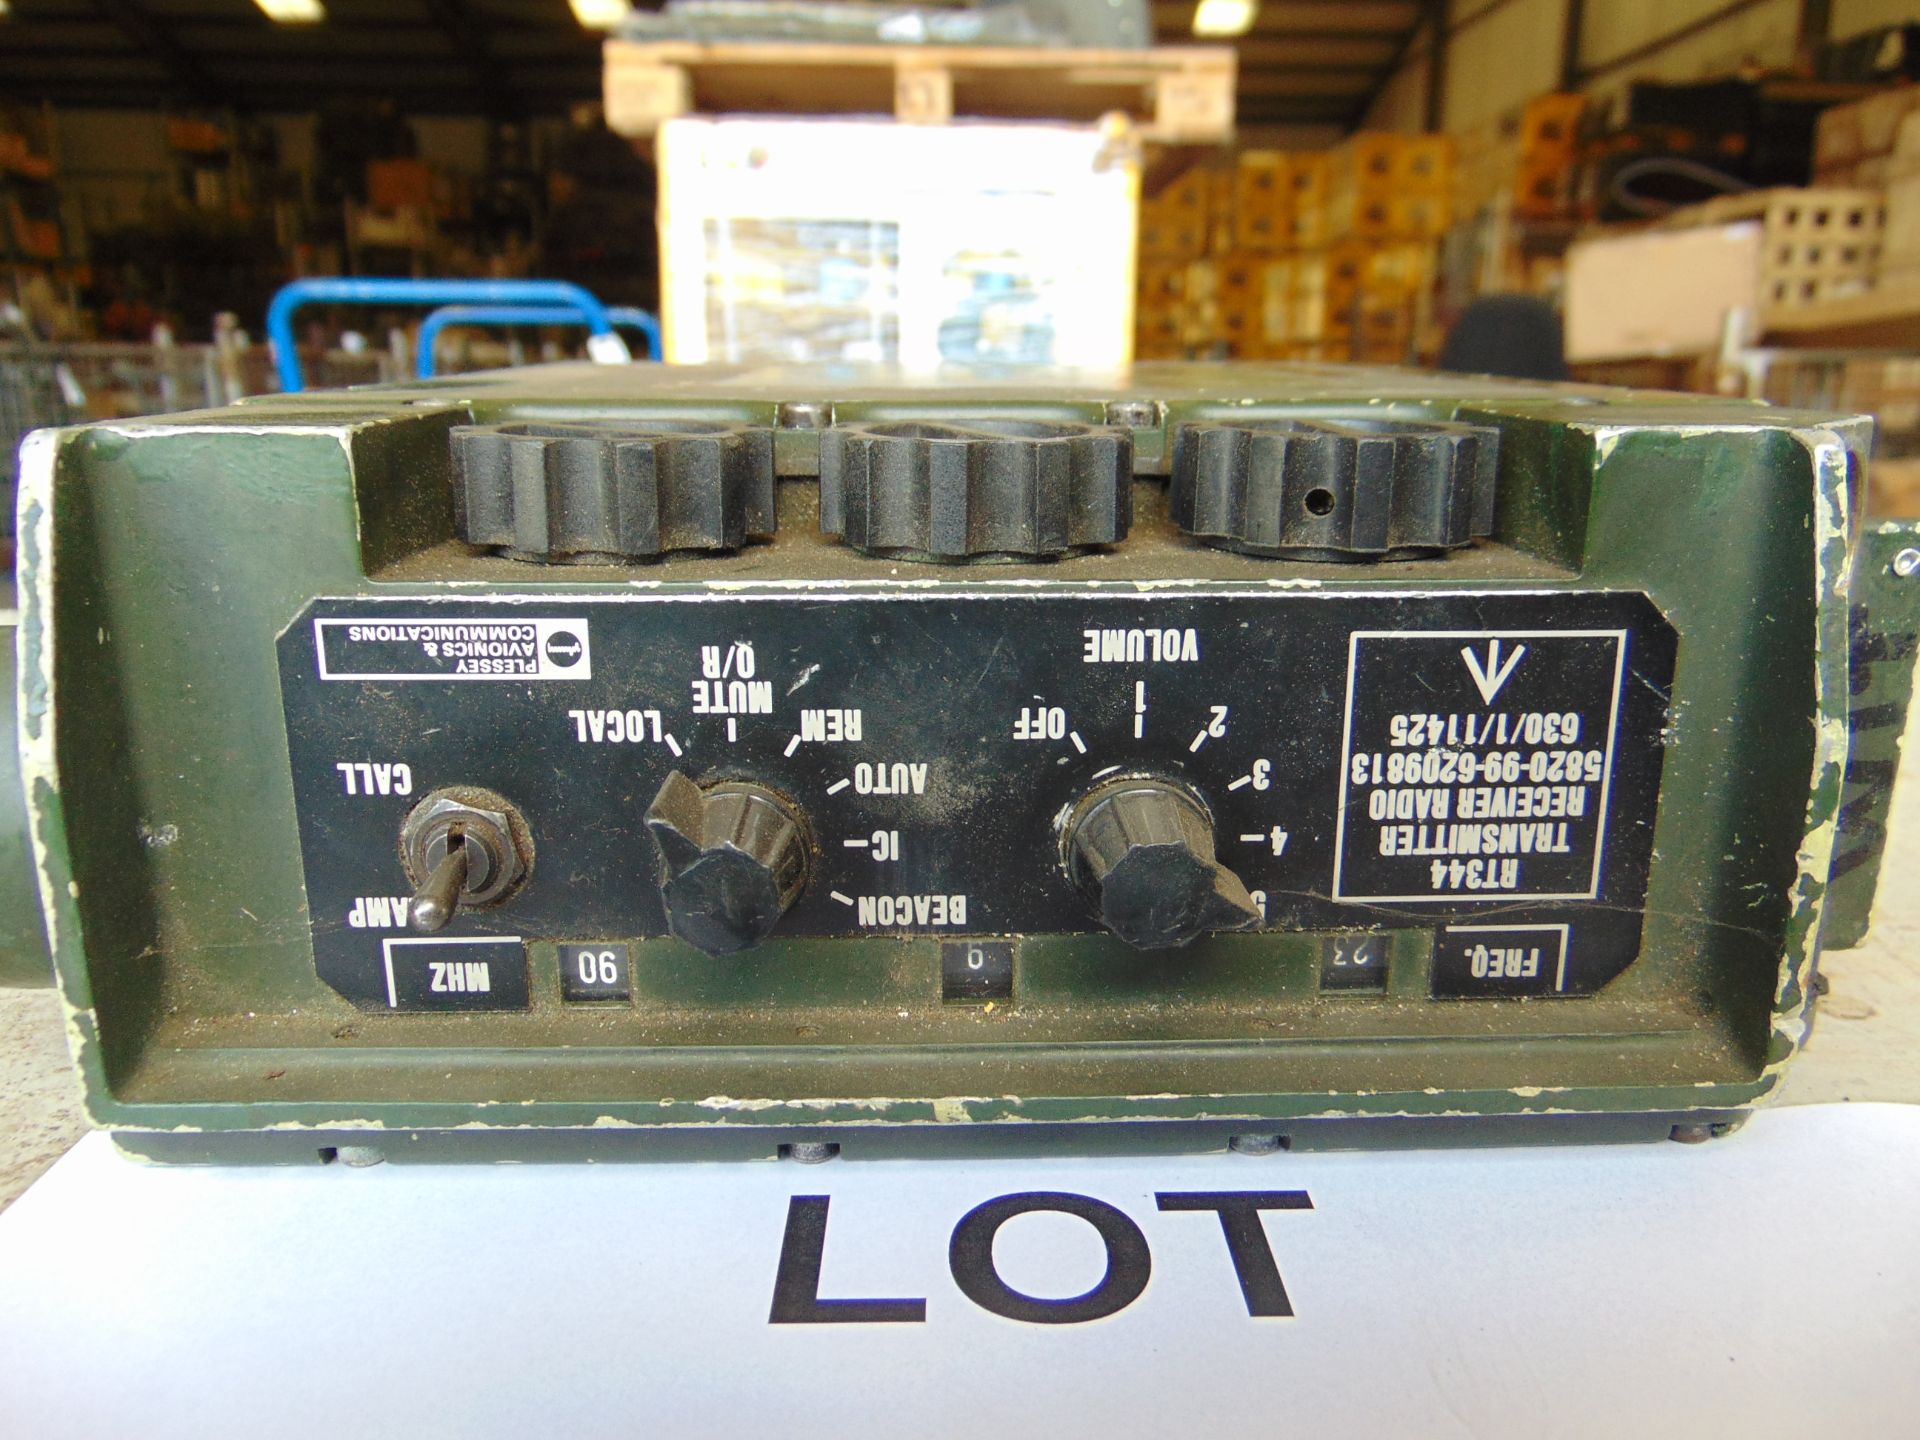 CLANSMAN RT 344 GROUND TO AIR TRANSMITTER RECIEVER UHF MANUFACTURED BY PLESSEY - Image 4 of 6